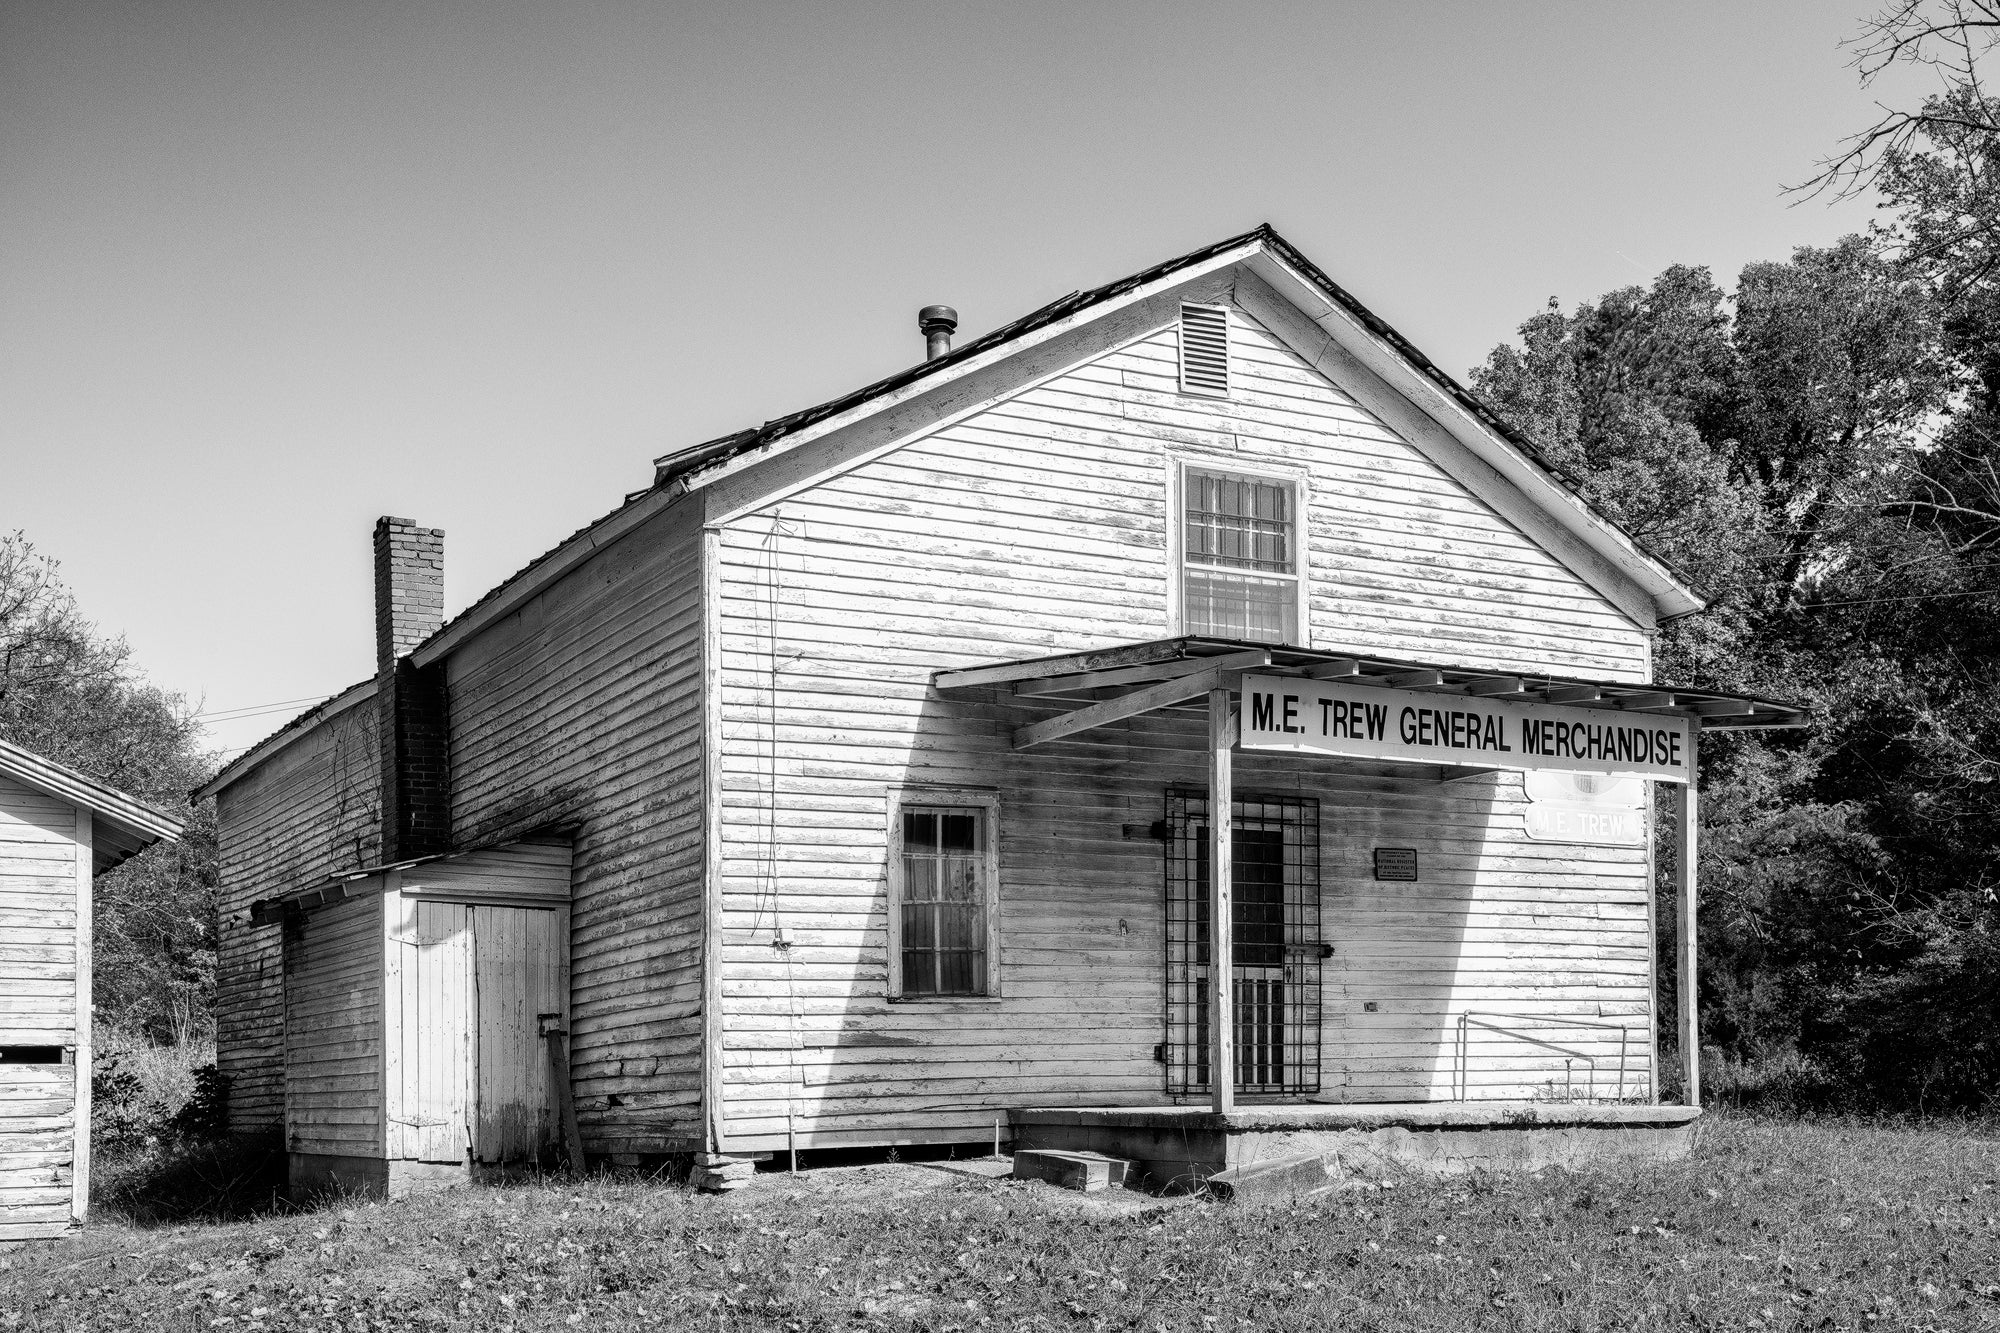 M.E. Trew General Merchandise Store - Black and White Photograph by Keith Dotson